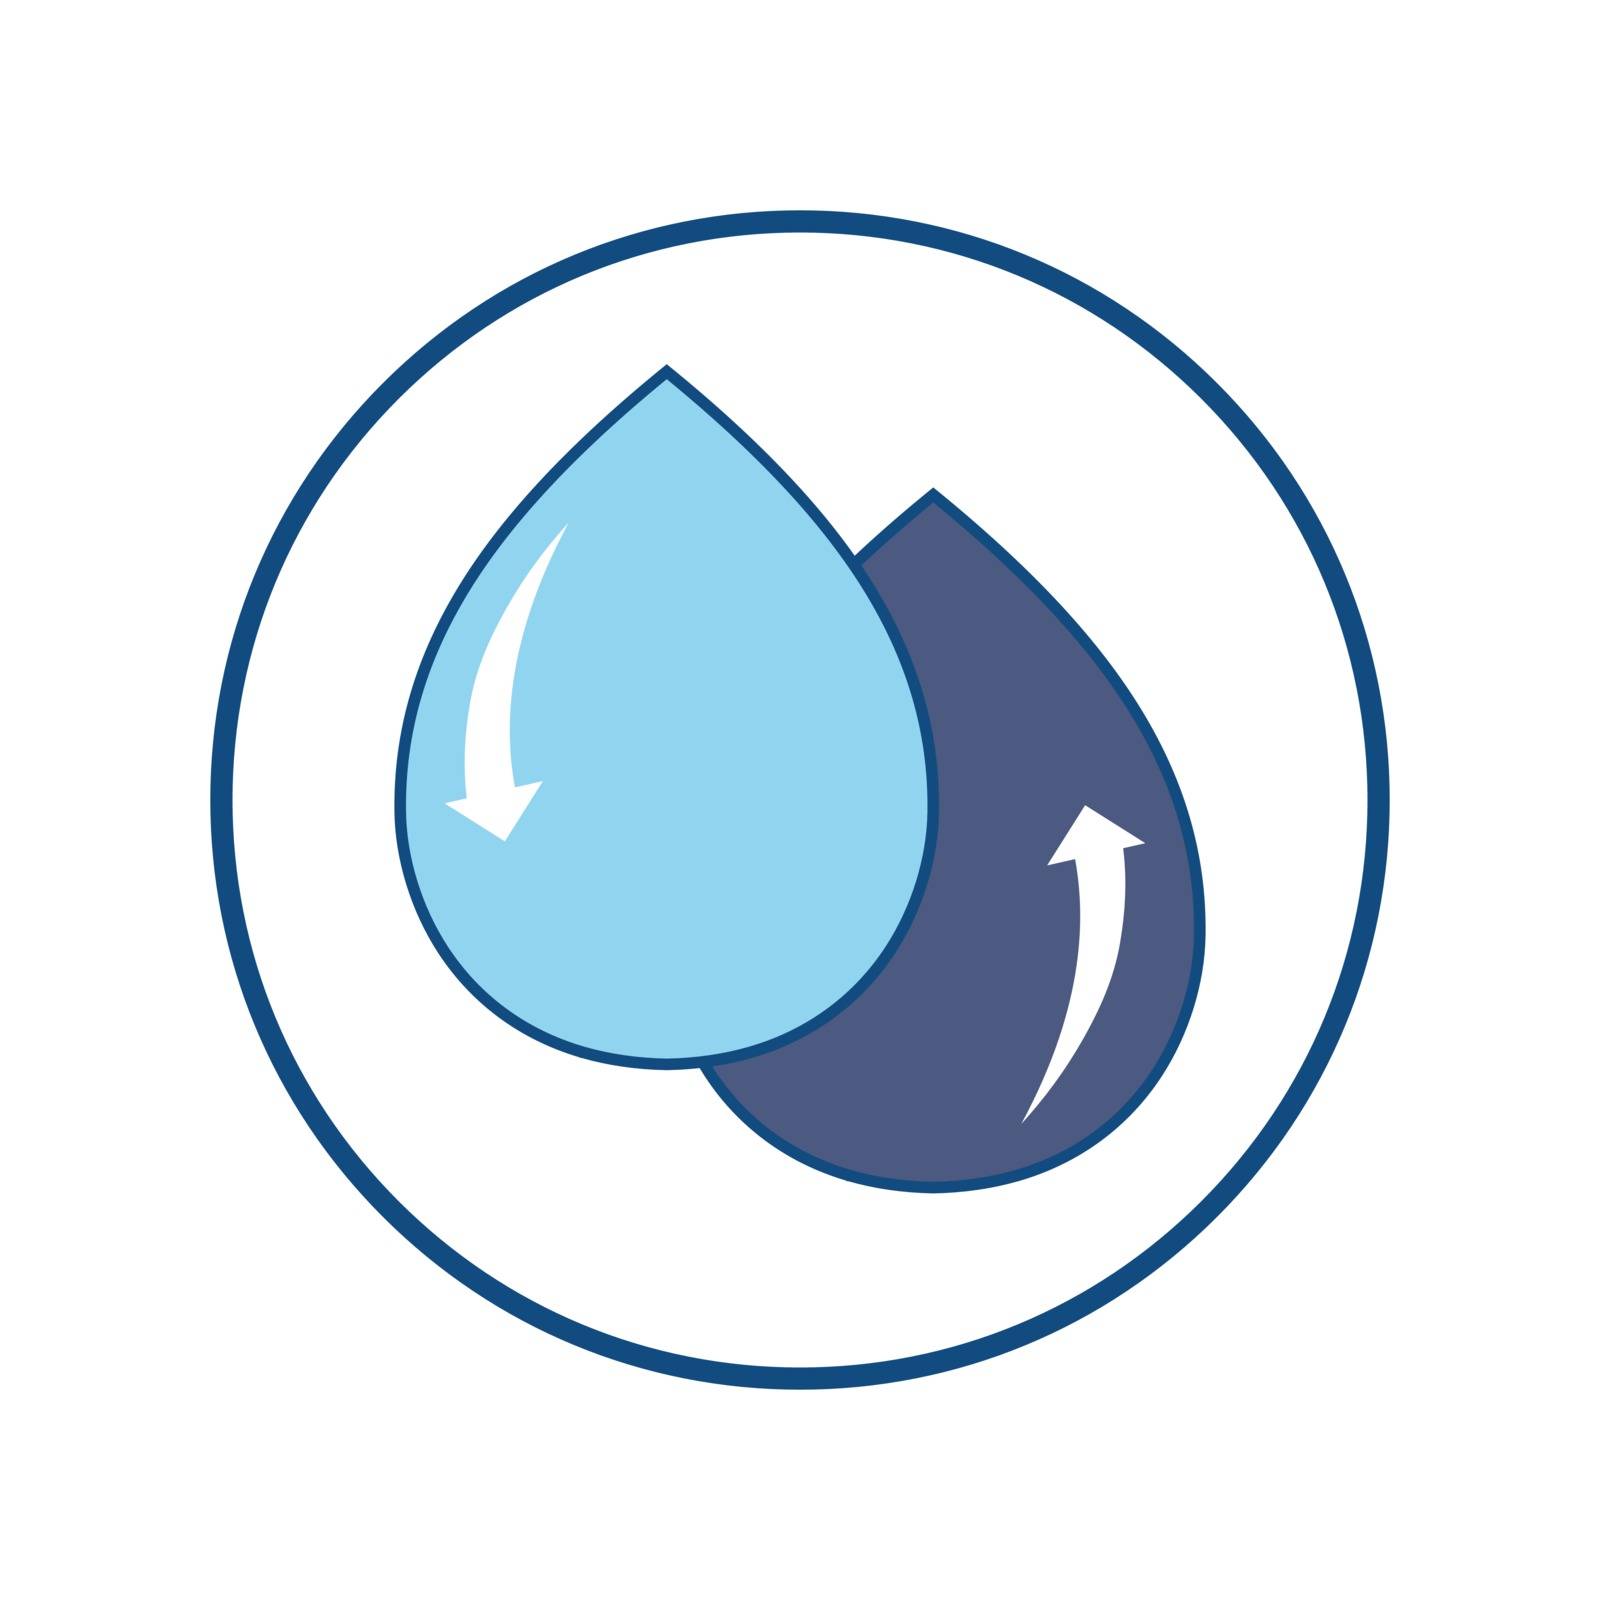 Water recycling concept. Water conservation metaphor. Symbol of water reuse. Vector illustration outline flat design style.